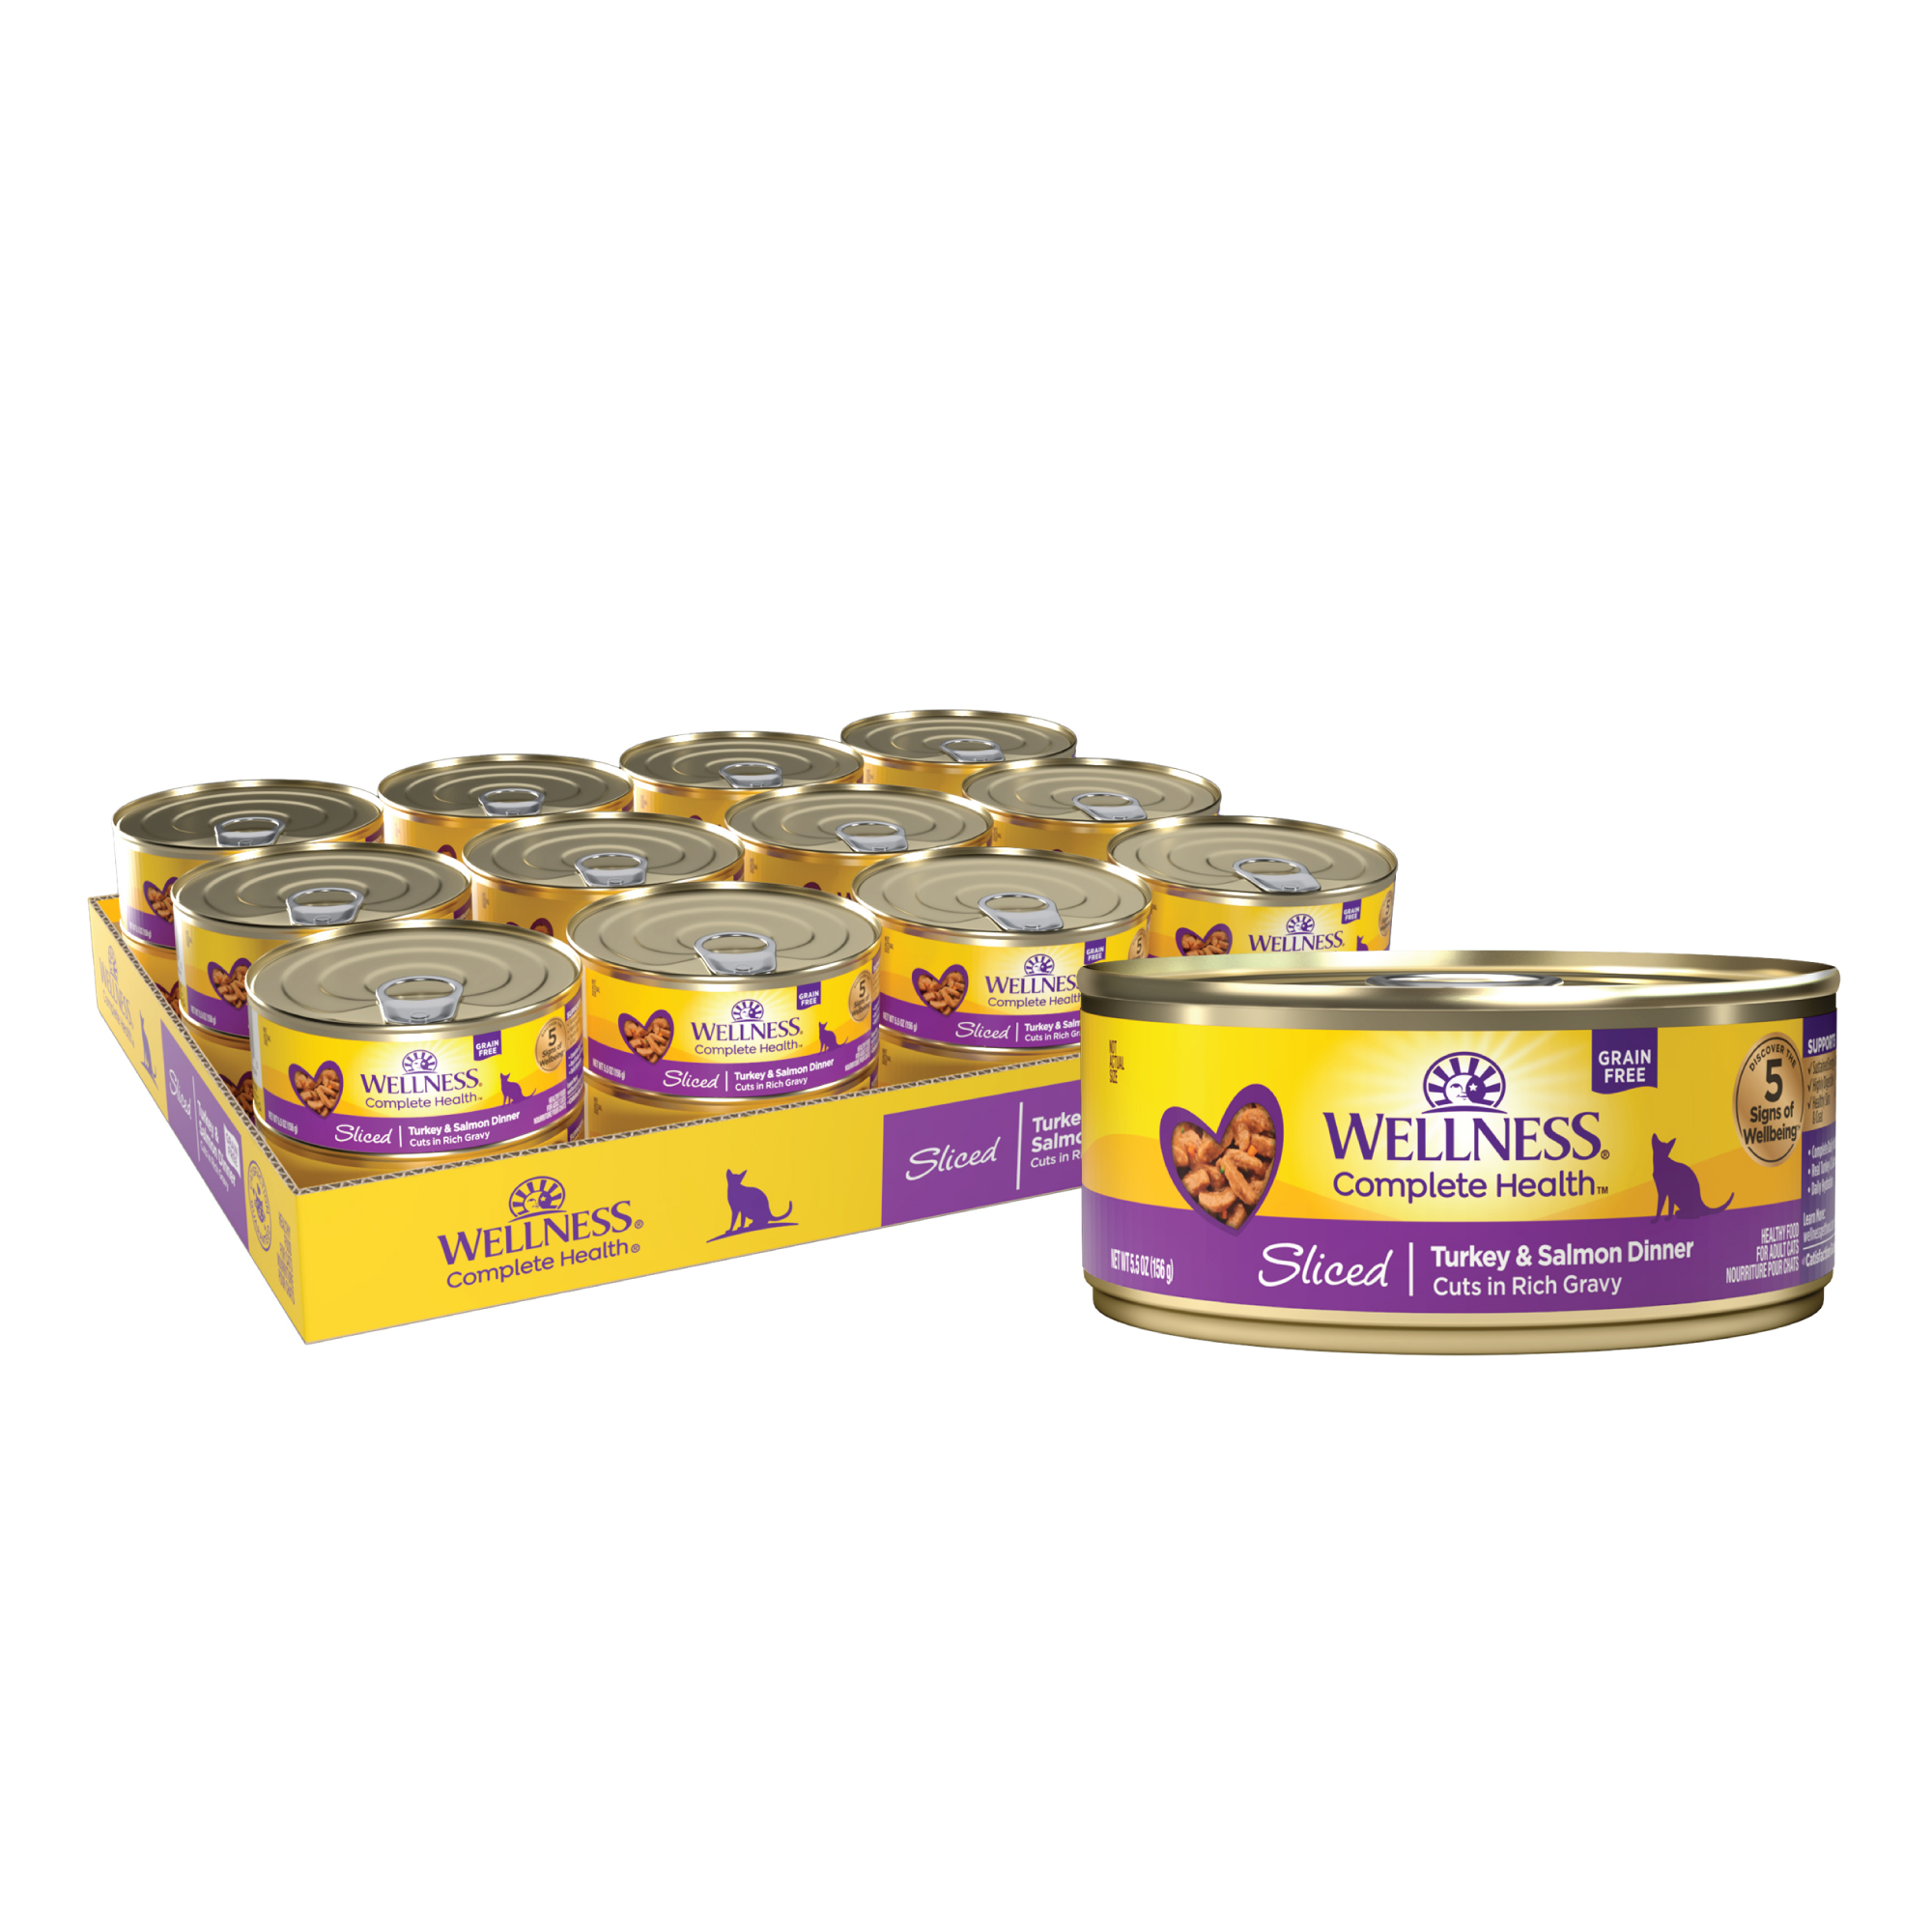 Wellness Complete Health Natural Grain Free Wet Canned Cat Food, Sliced Turkey & Salmon Entree, 5.5-Ounce Can (Pack of 24) - image 1 of 9